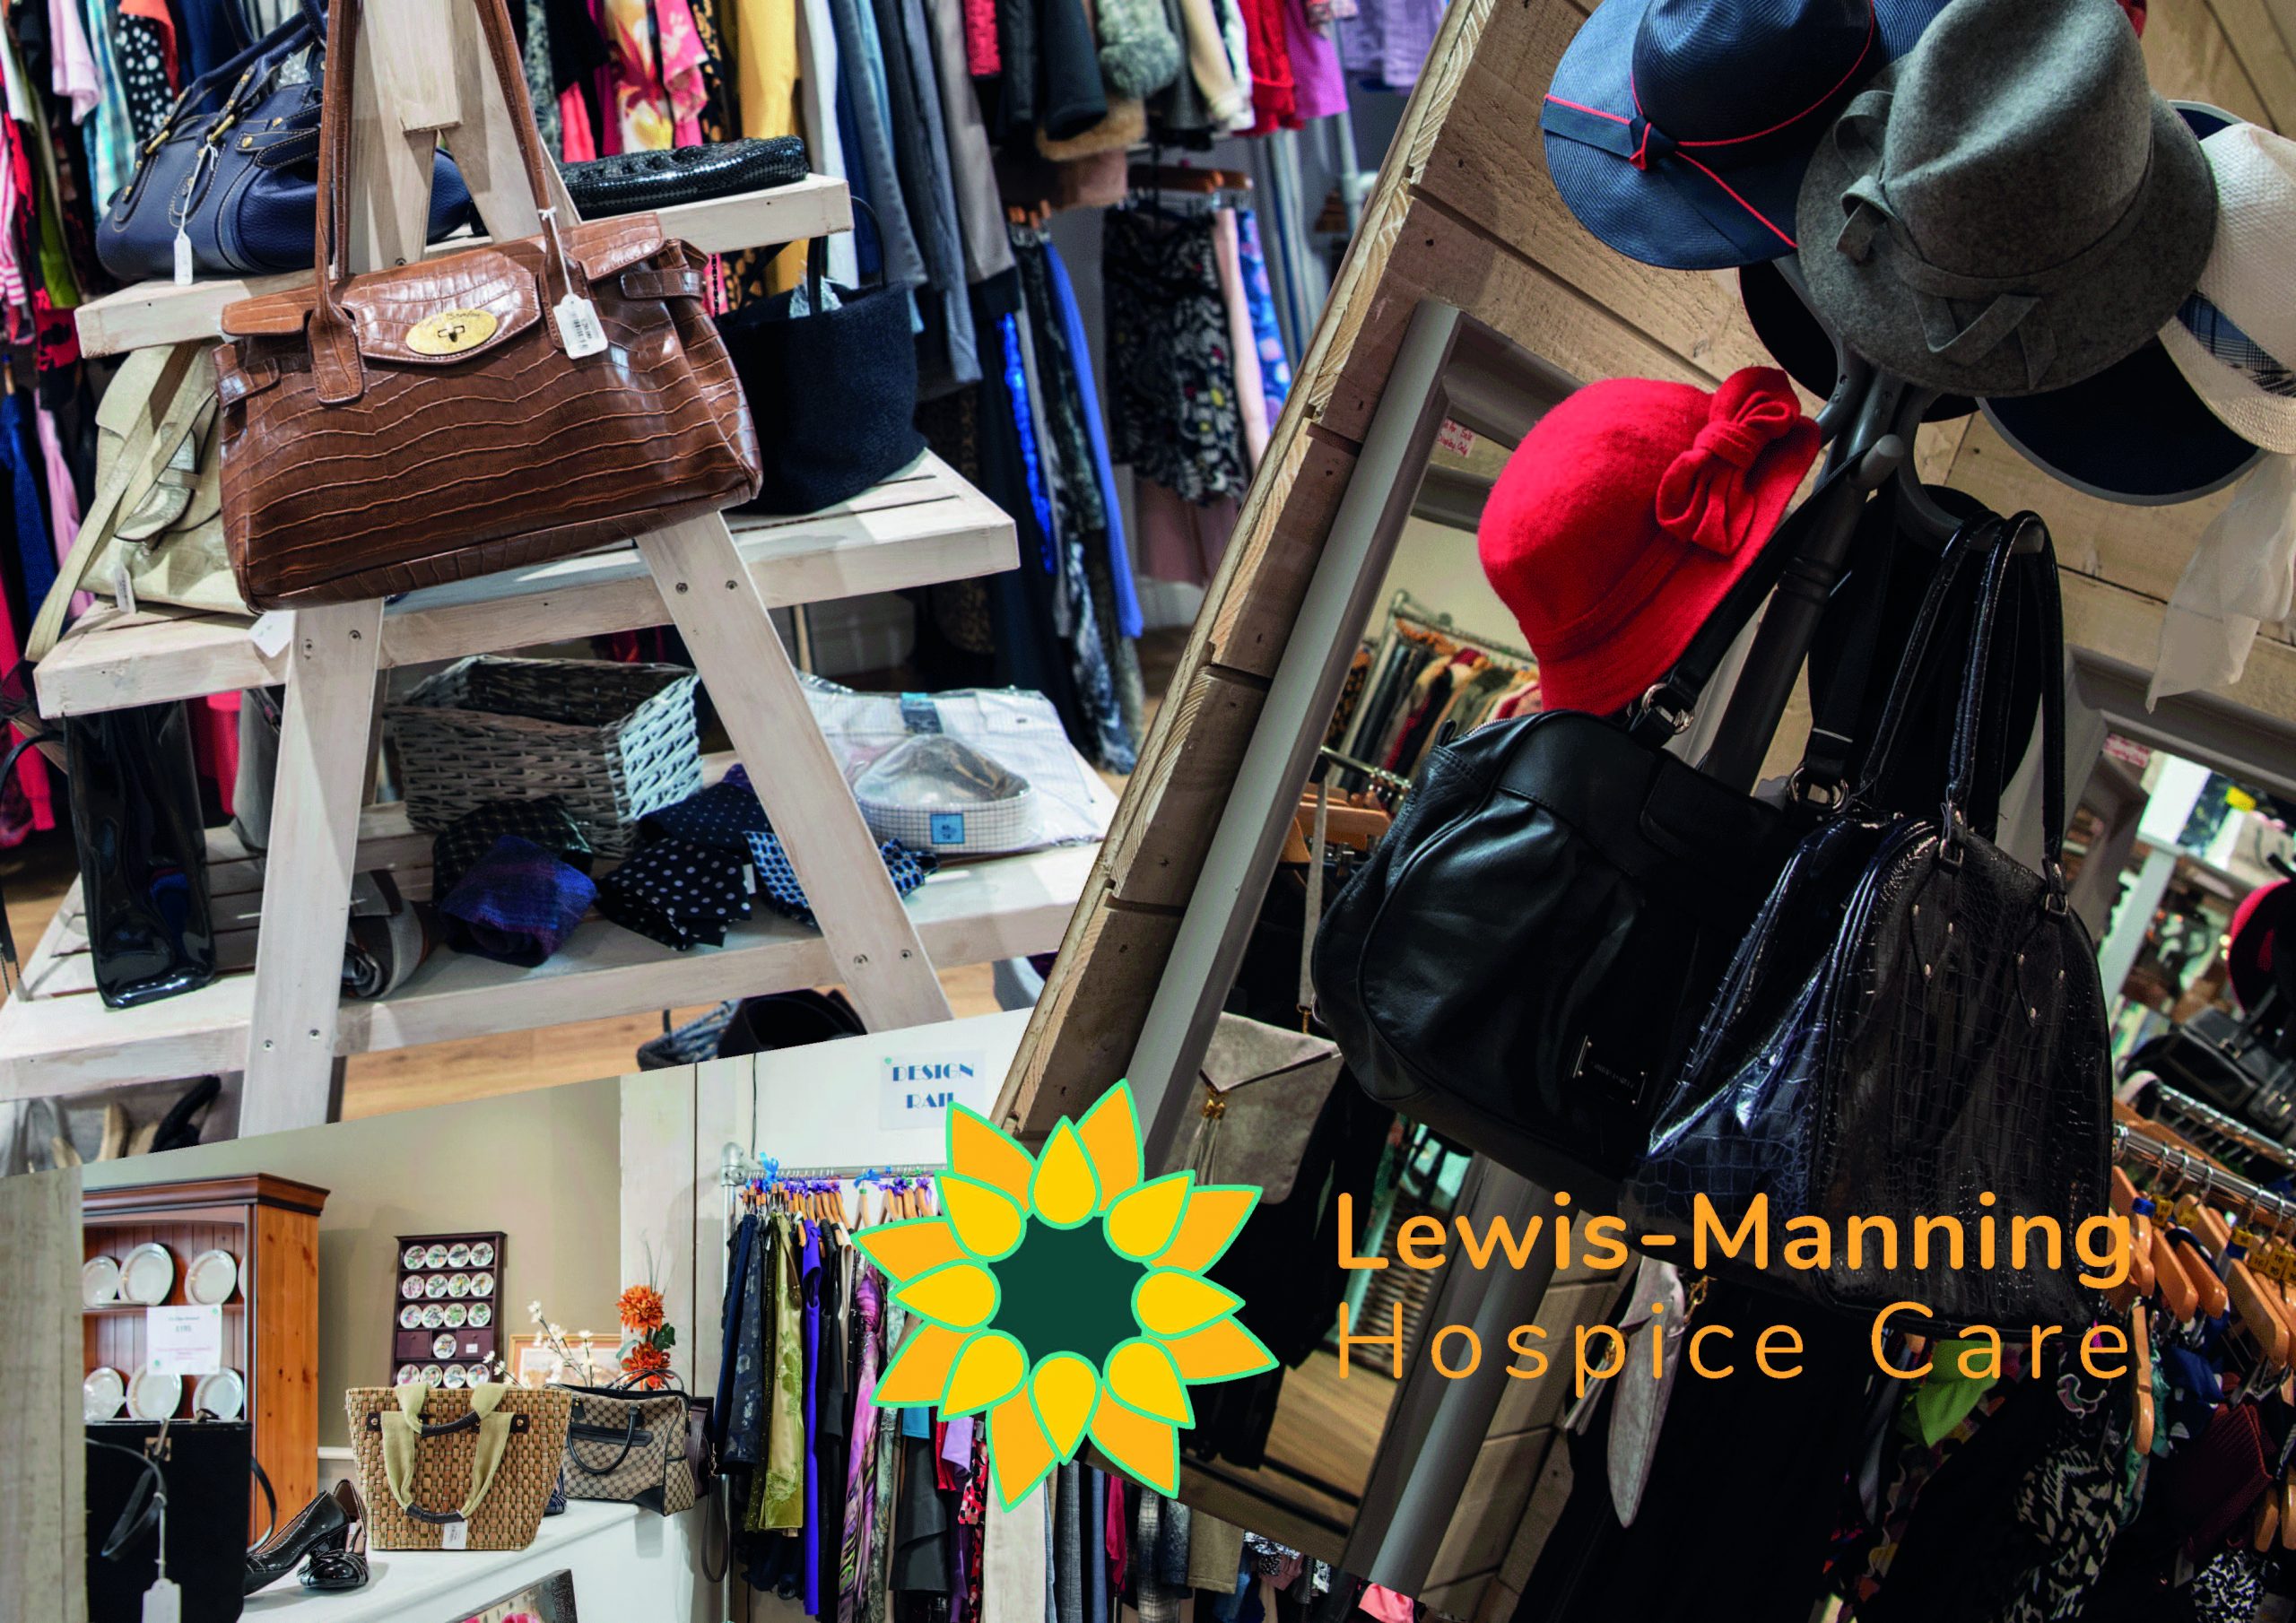 Drive Through Donation Stations launched for Lewis-Manning Hospice Care charity shops